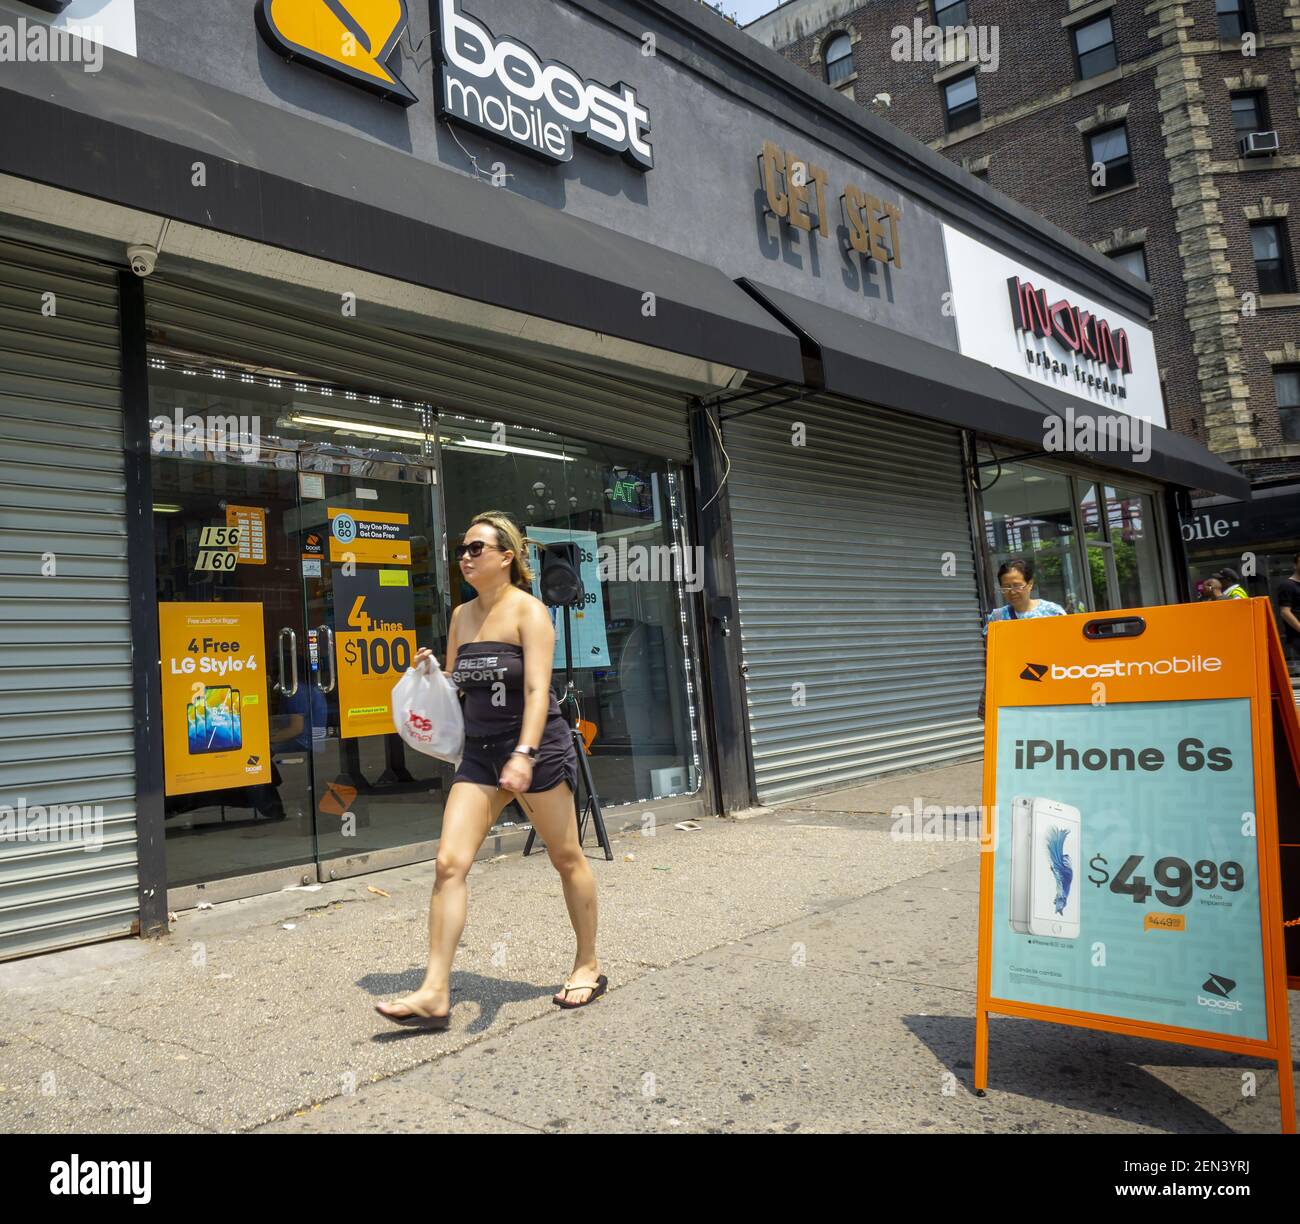 A Boost Mobile store in the Lower East Side neighborhood in New York on  Sunday, June 2, 2019. Amazon is reported to be interested in purchasing  Sprintâ€™s Boost Mobile prepaid wireless business